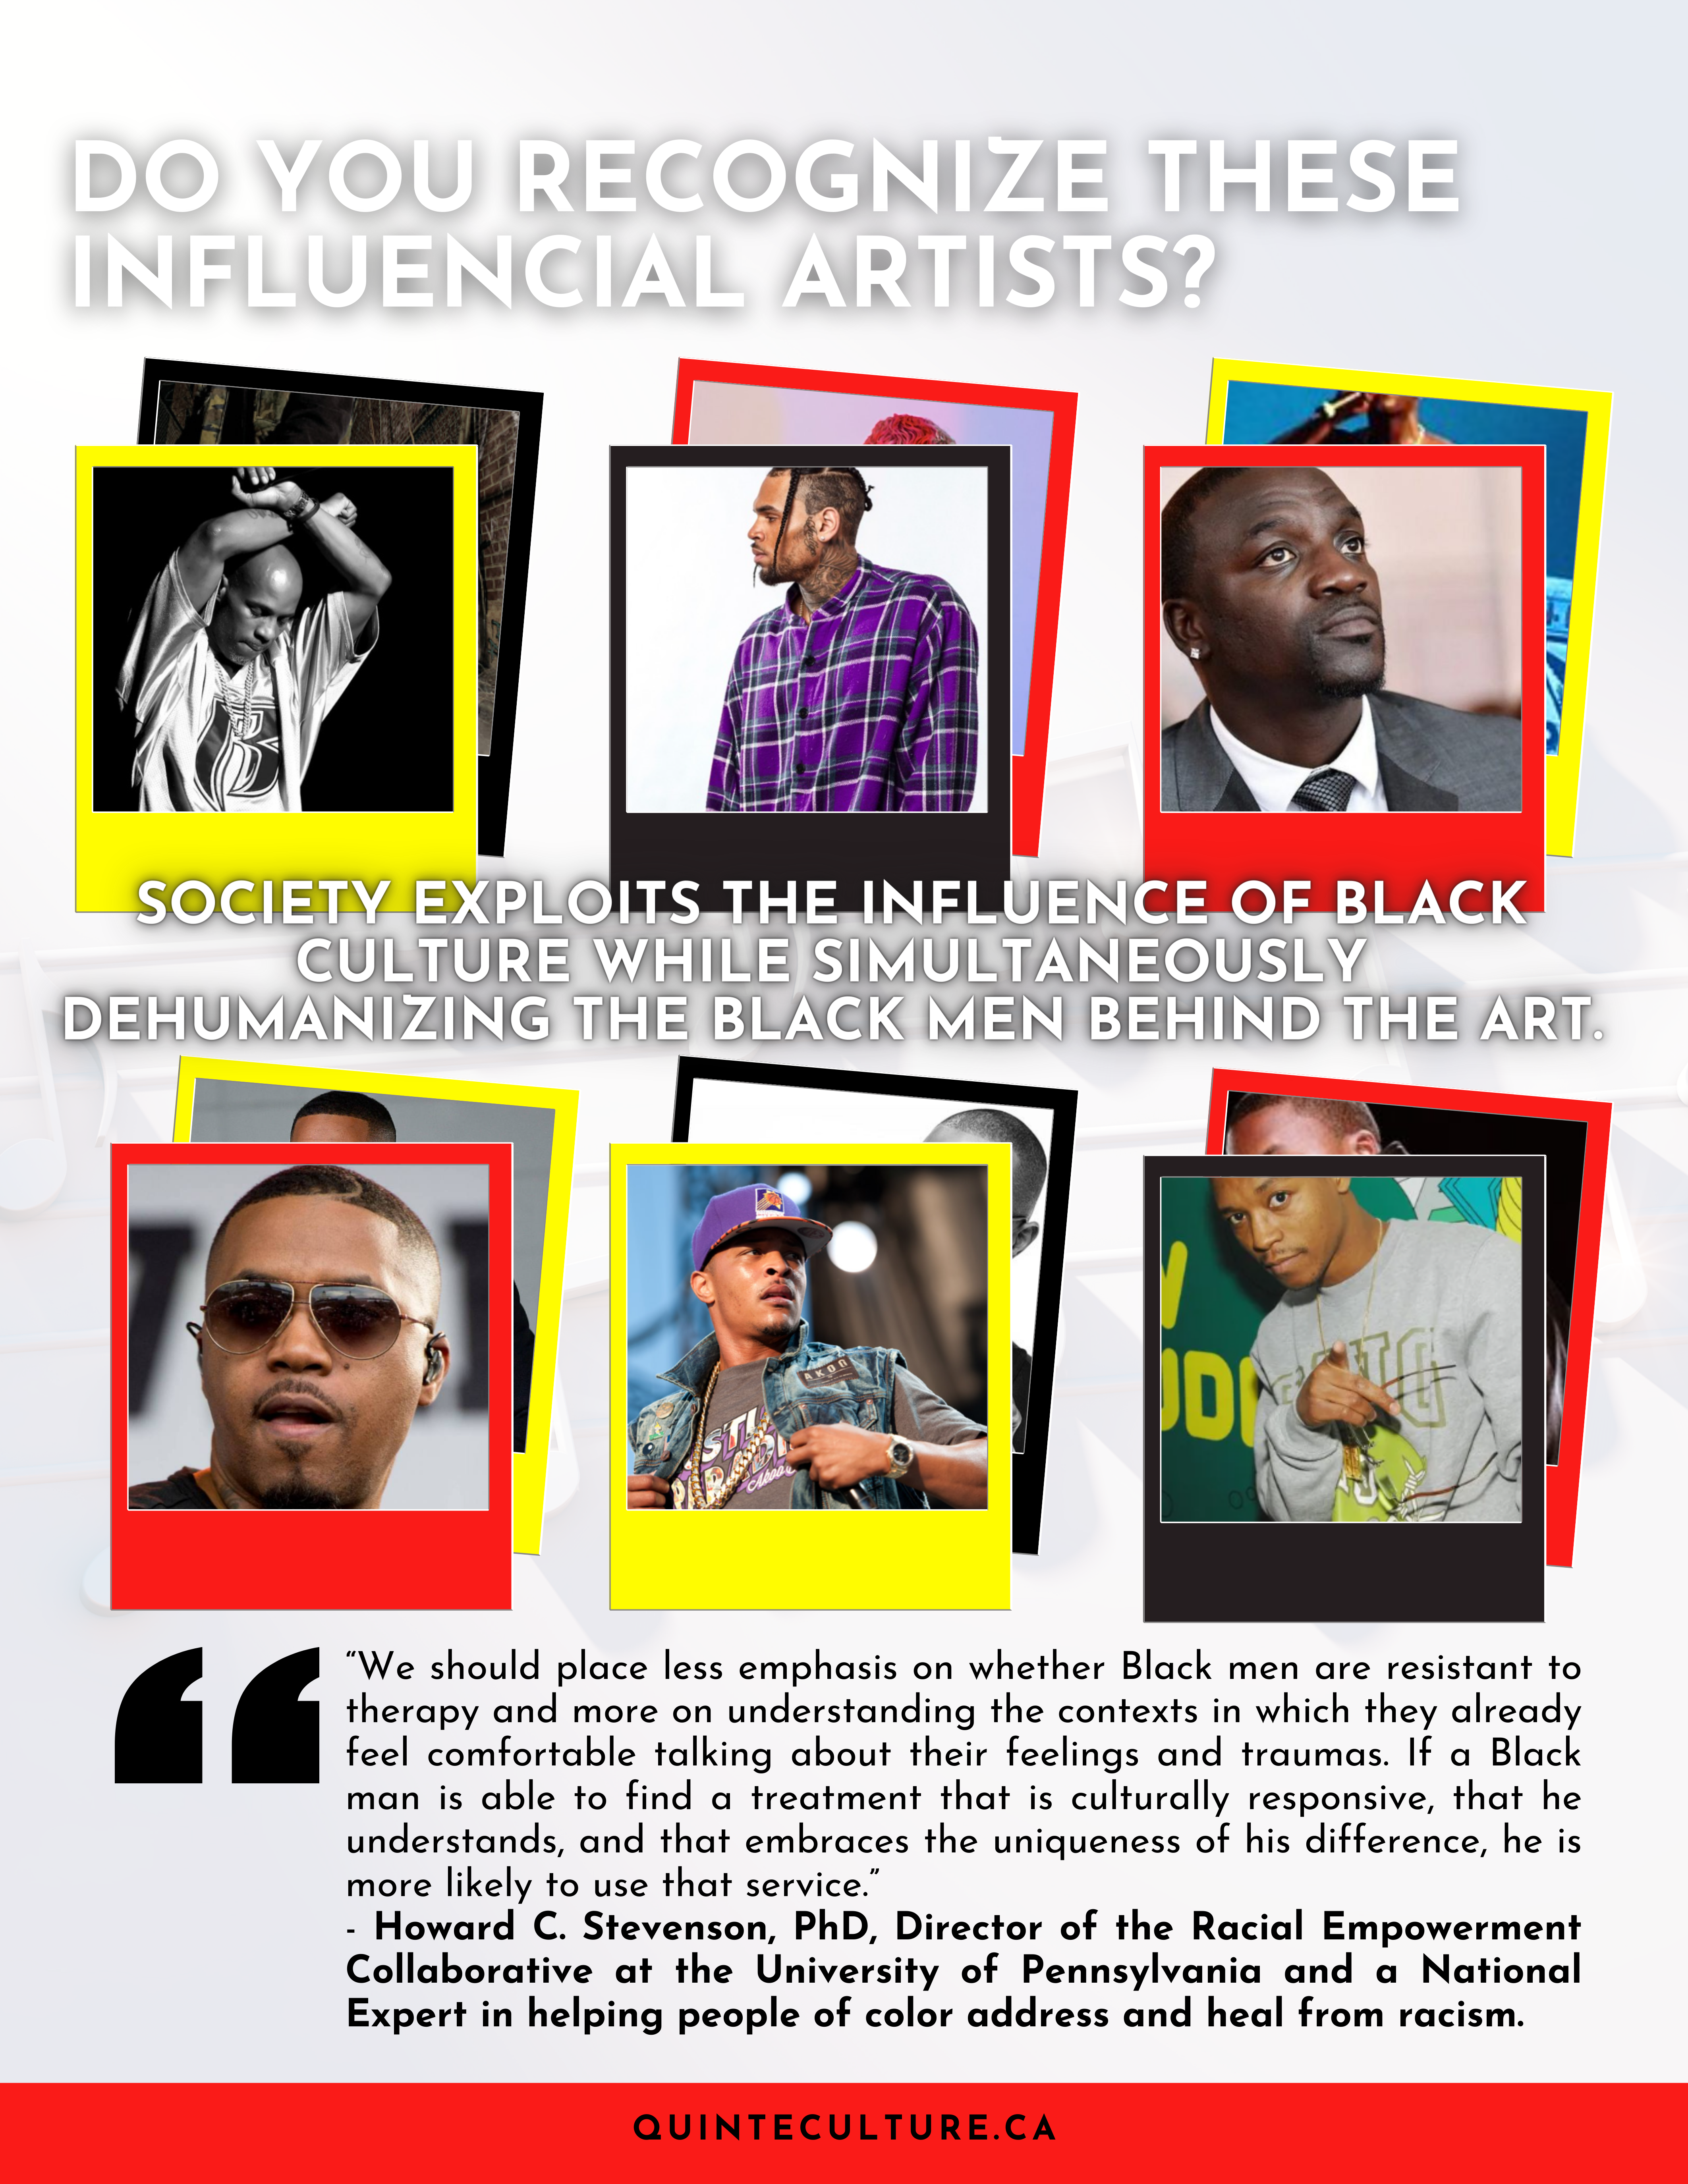 Image poster including photos of influential musicians. Ask, do you recognize this influential artist?